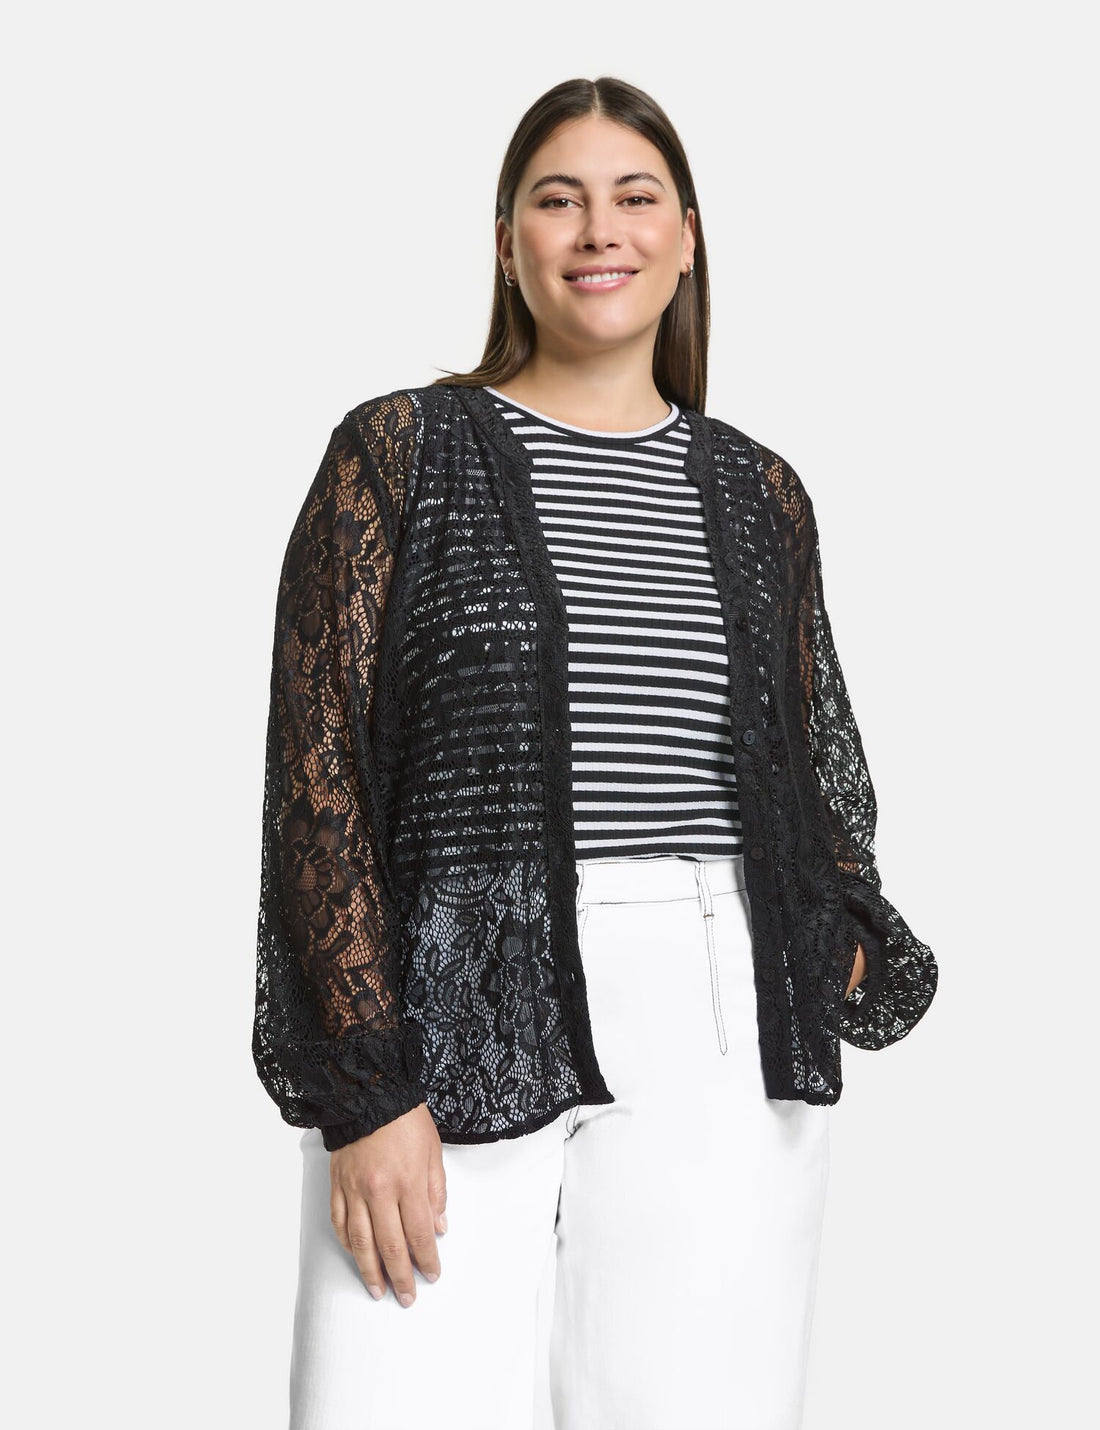 Lace Blouse With Balloon Sleeves_460023-21056_1100_01